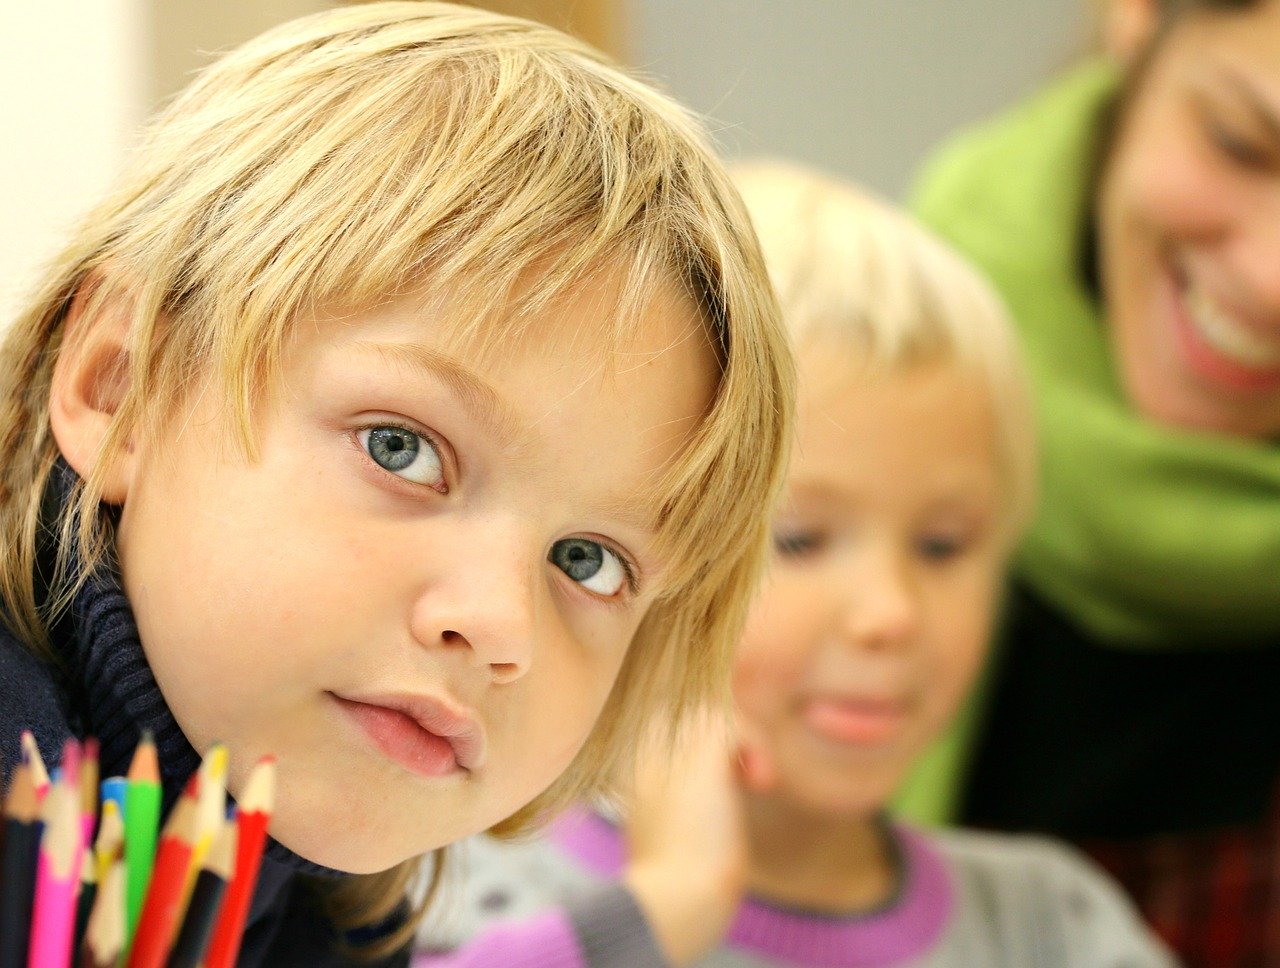 very young student stares at the camera, holding a colored pencil; differentiated learning concept